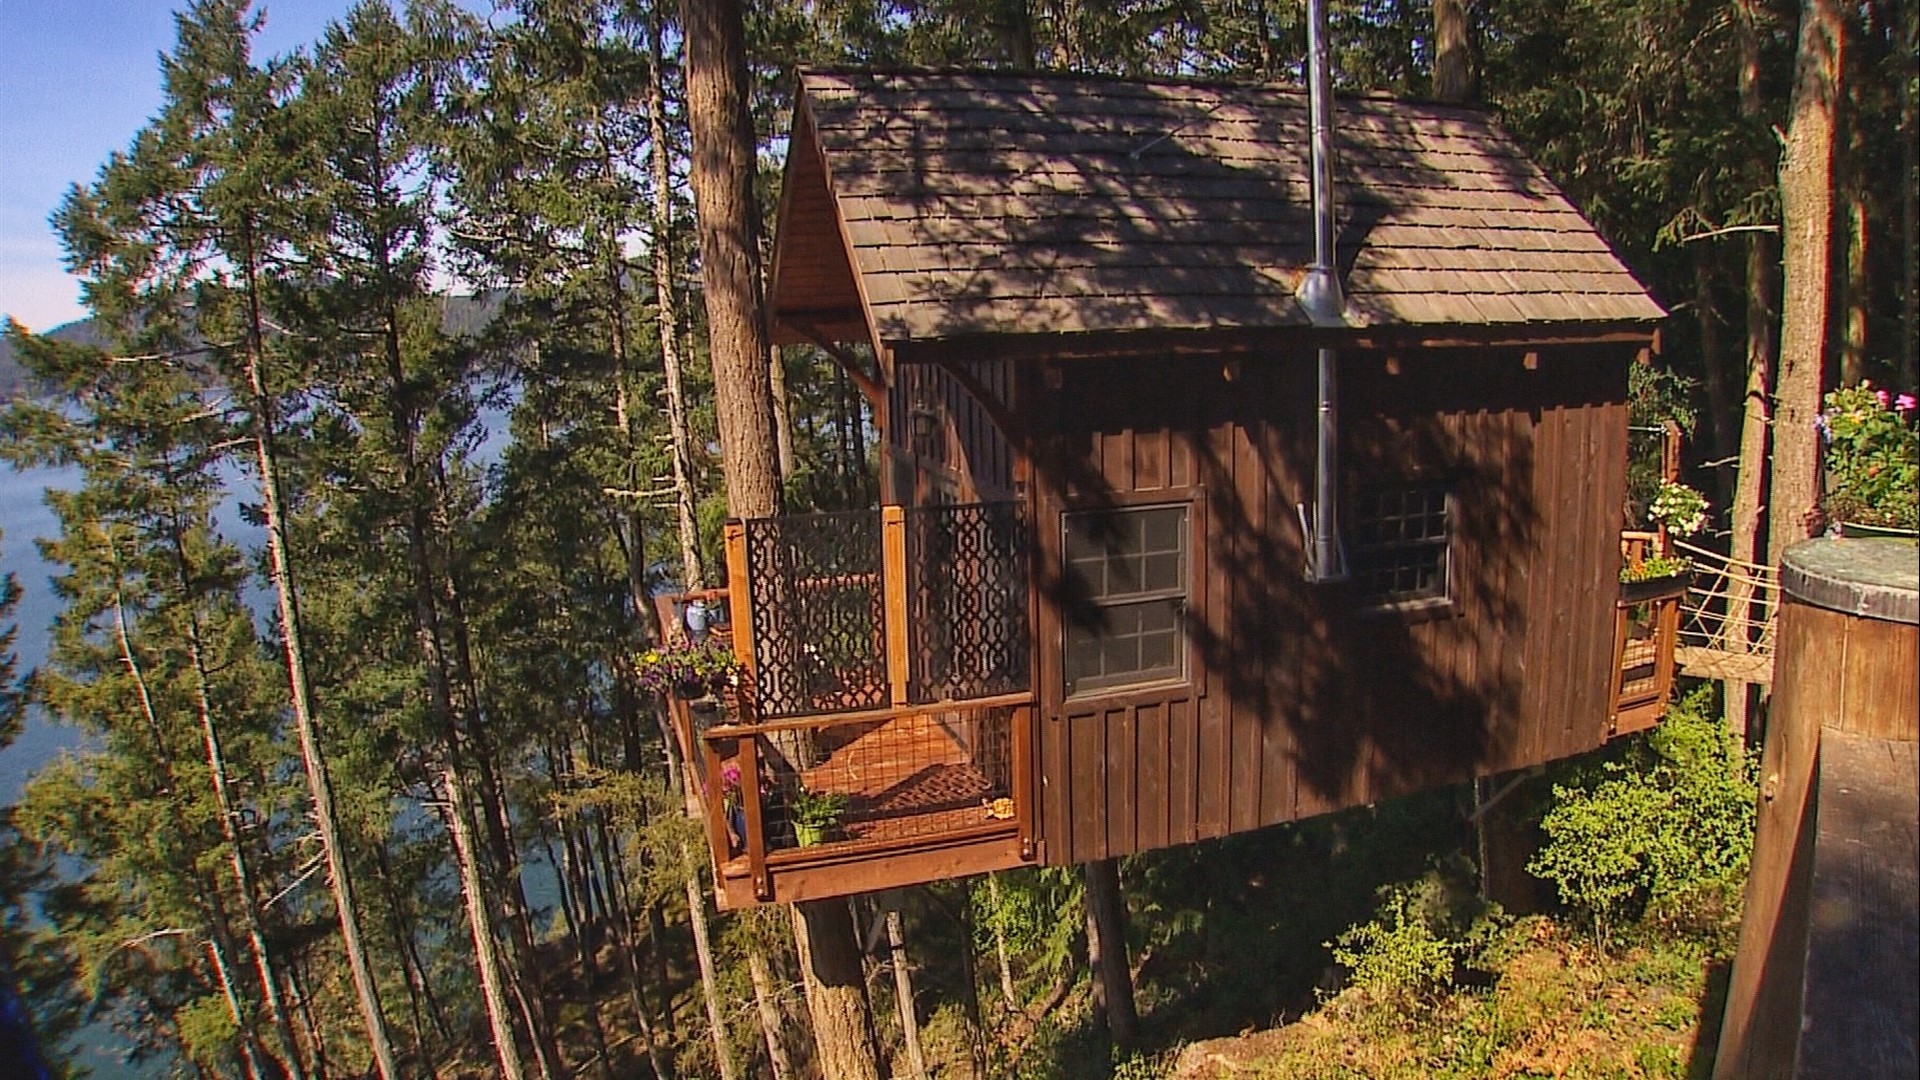 Hilltop Treehouse Retreat won Best Quirky Vacation Rental in 2019's Best Northwest Escapes! #k5evening